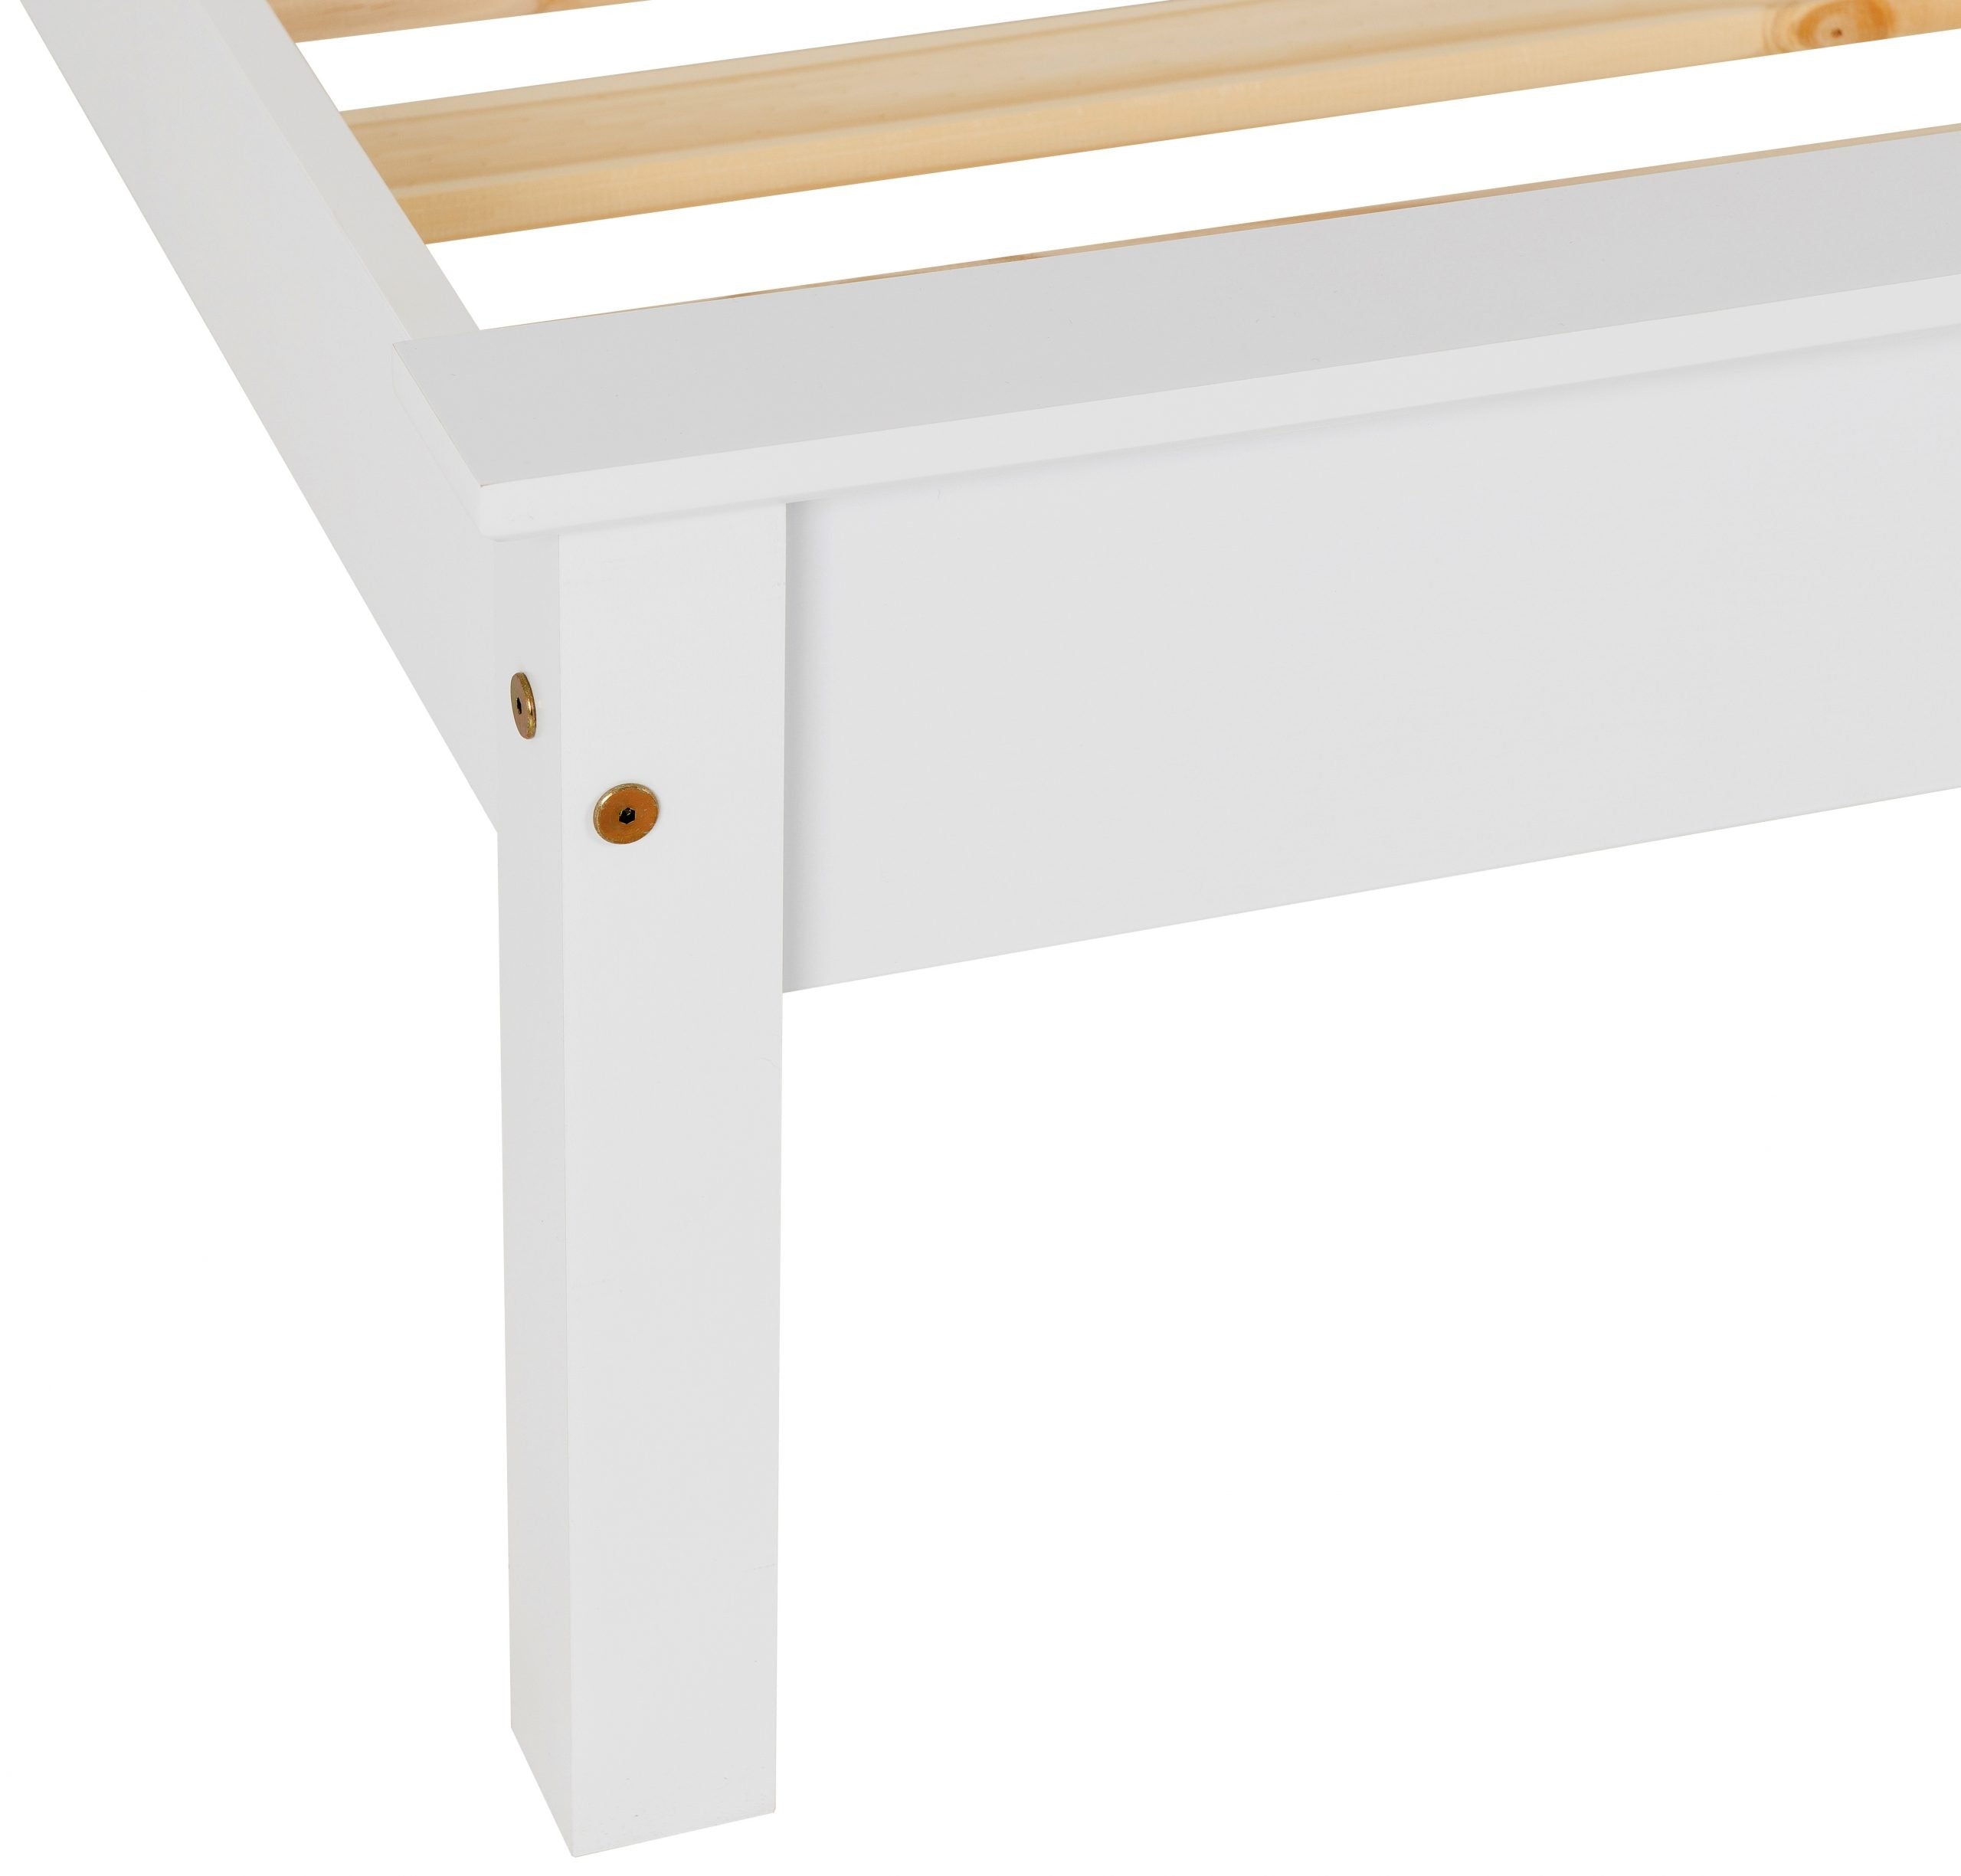 low foot end bed frame